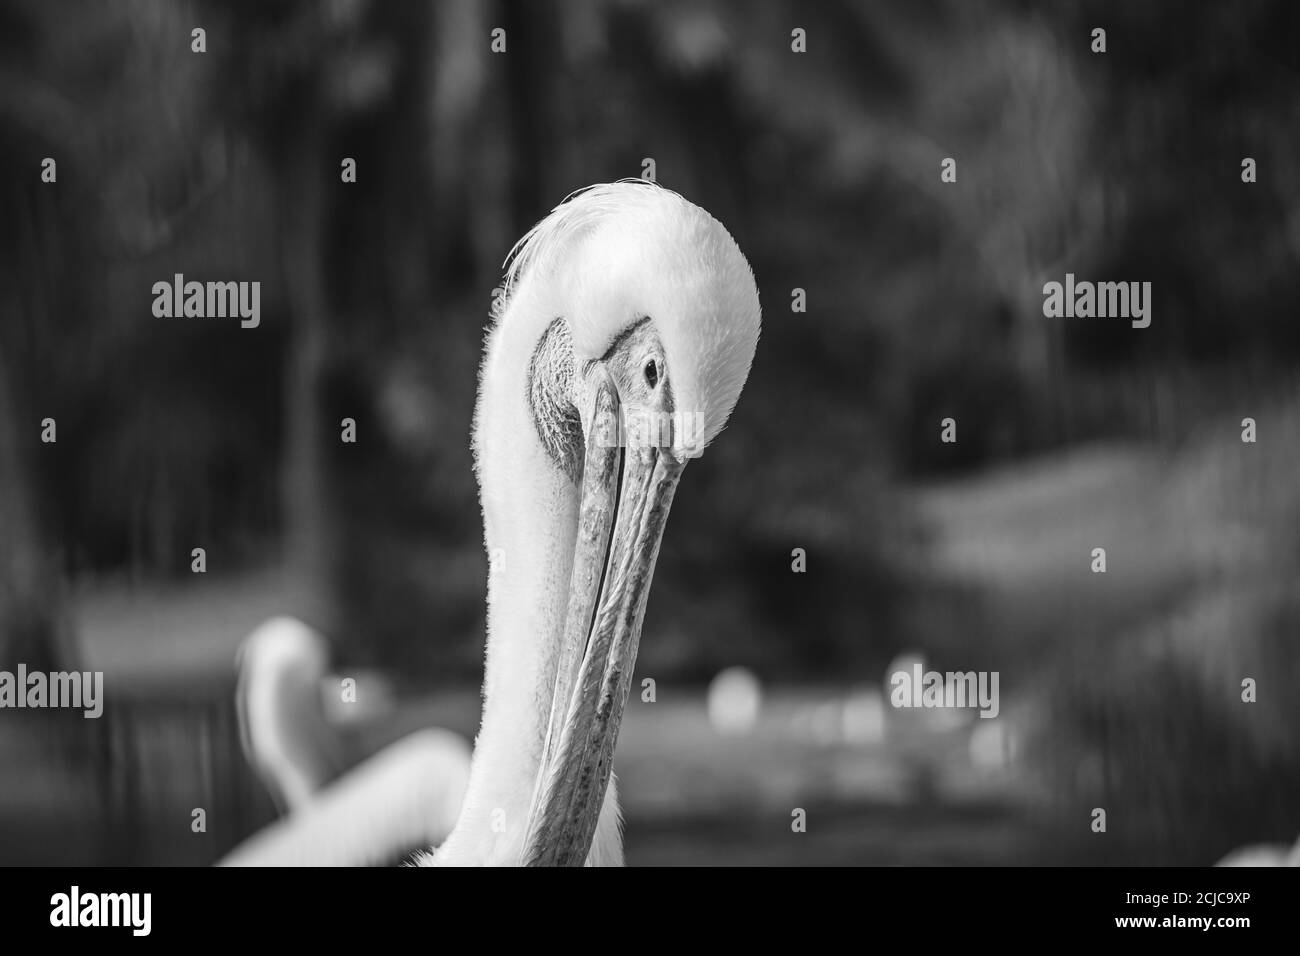 The great white pelican (Pelecanus onocrotalus) photo when cleaning the feathers with the beak. Blurred background. Jerusalem. Stock Photo